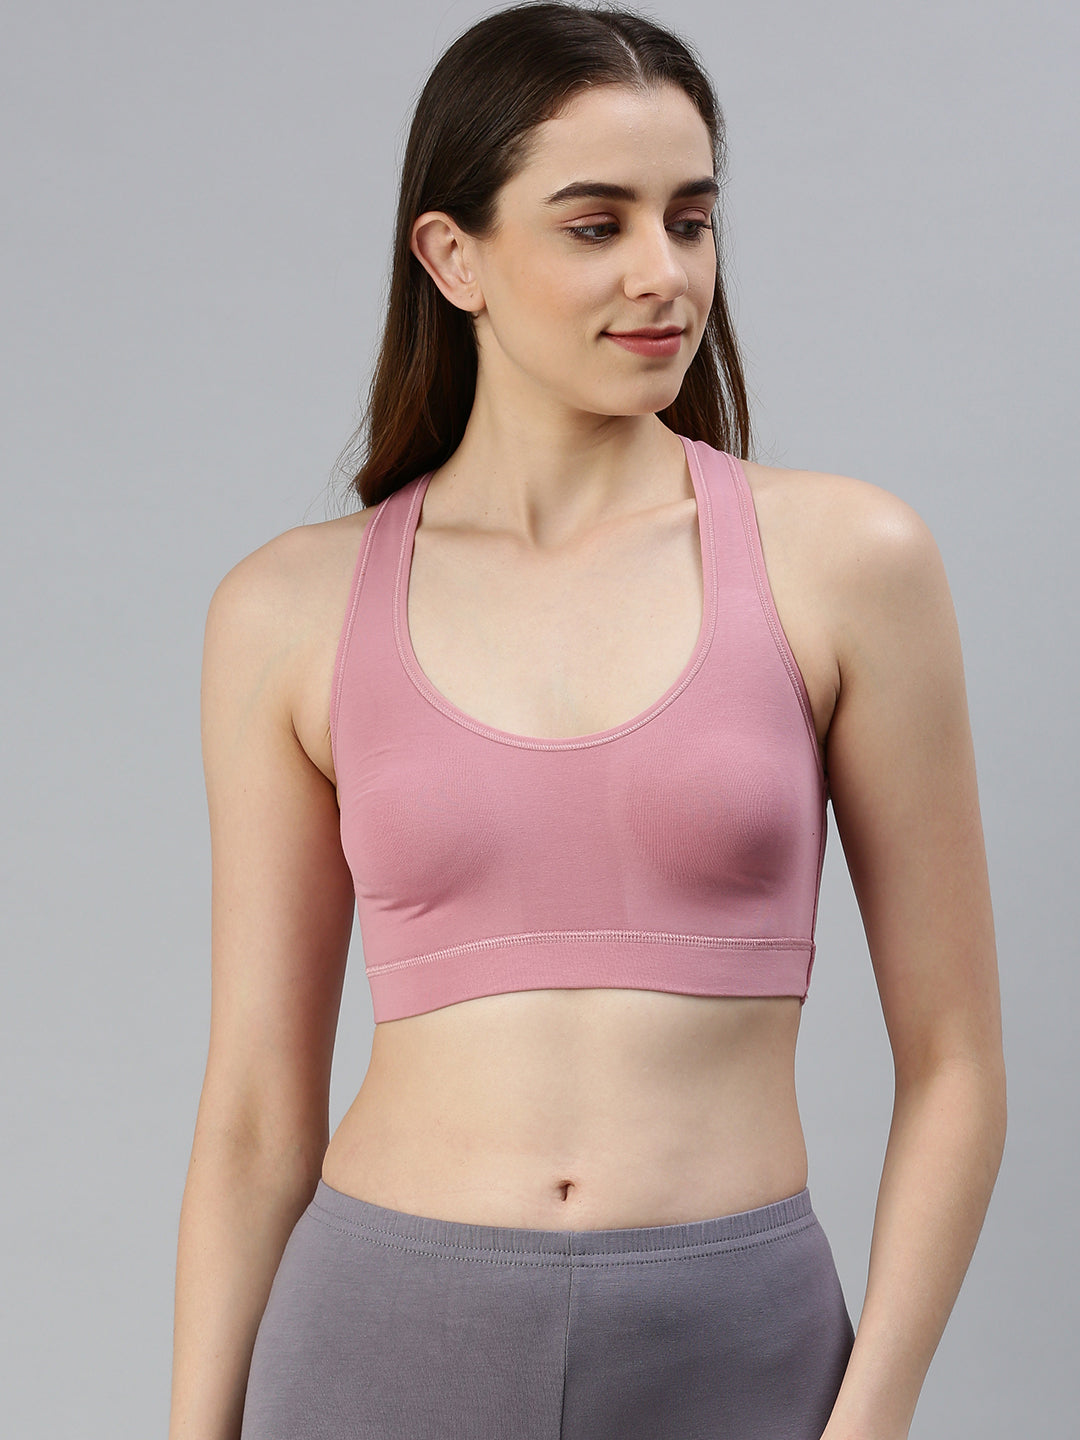 Shop All Wear One's At Women's Activewear